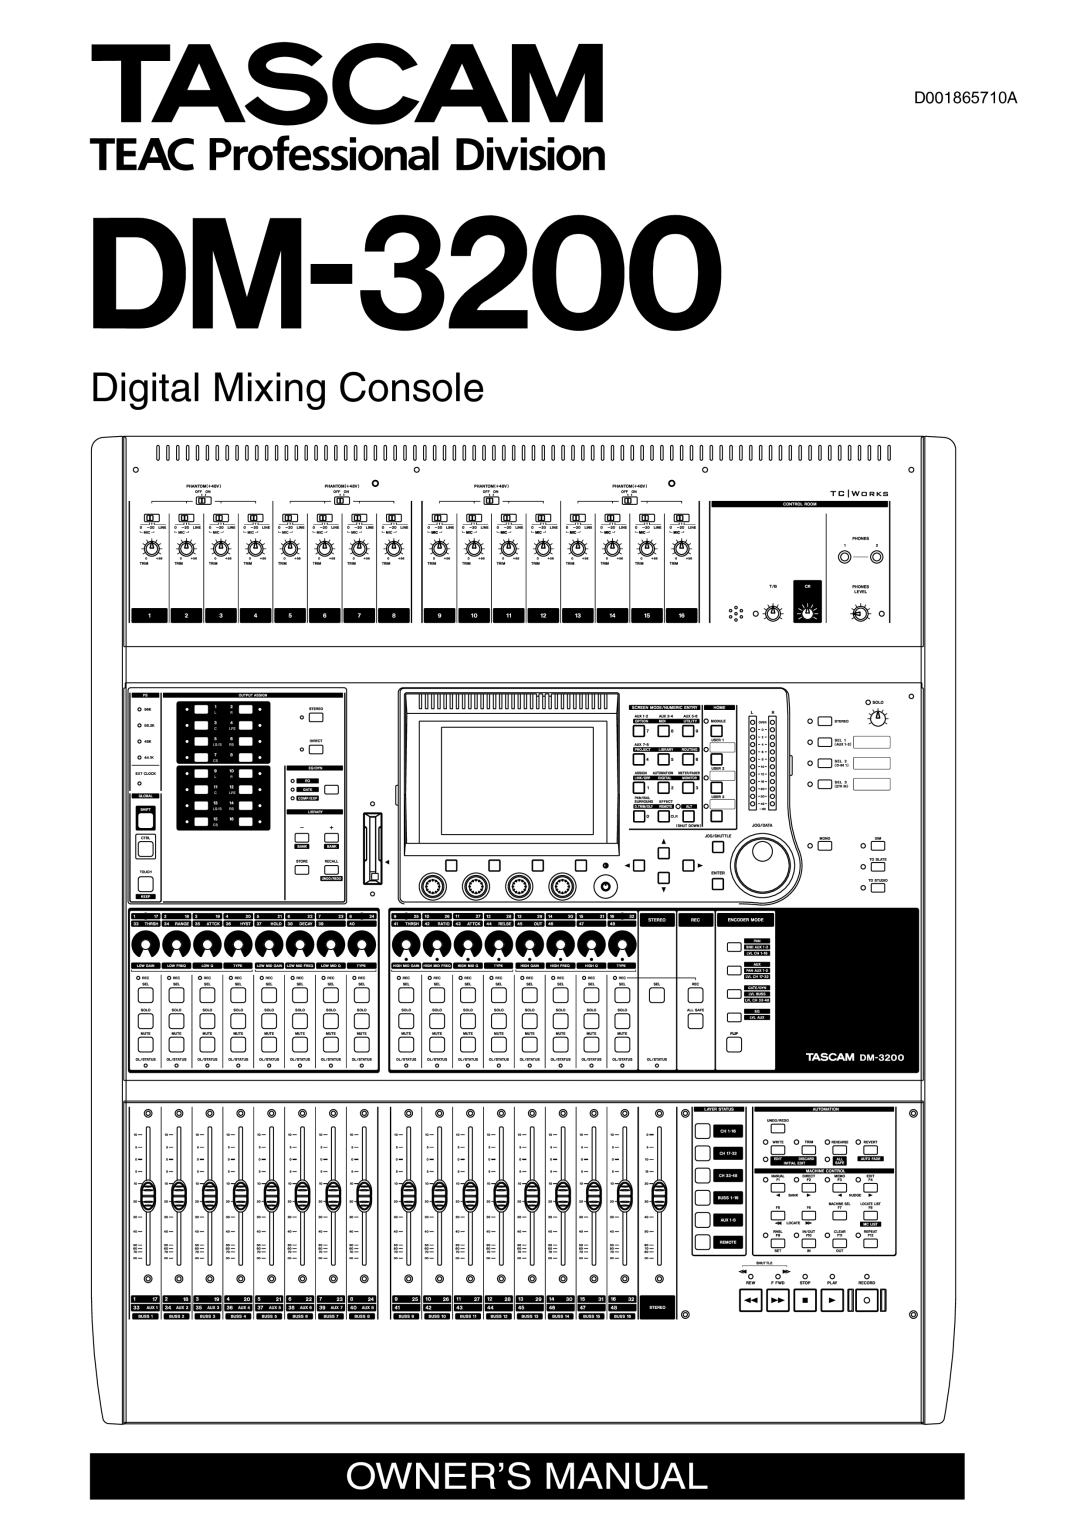 Tascam manual Applications Guide, DM-3200 32-channel Digital Mixing Console 